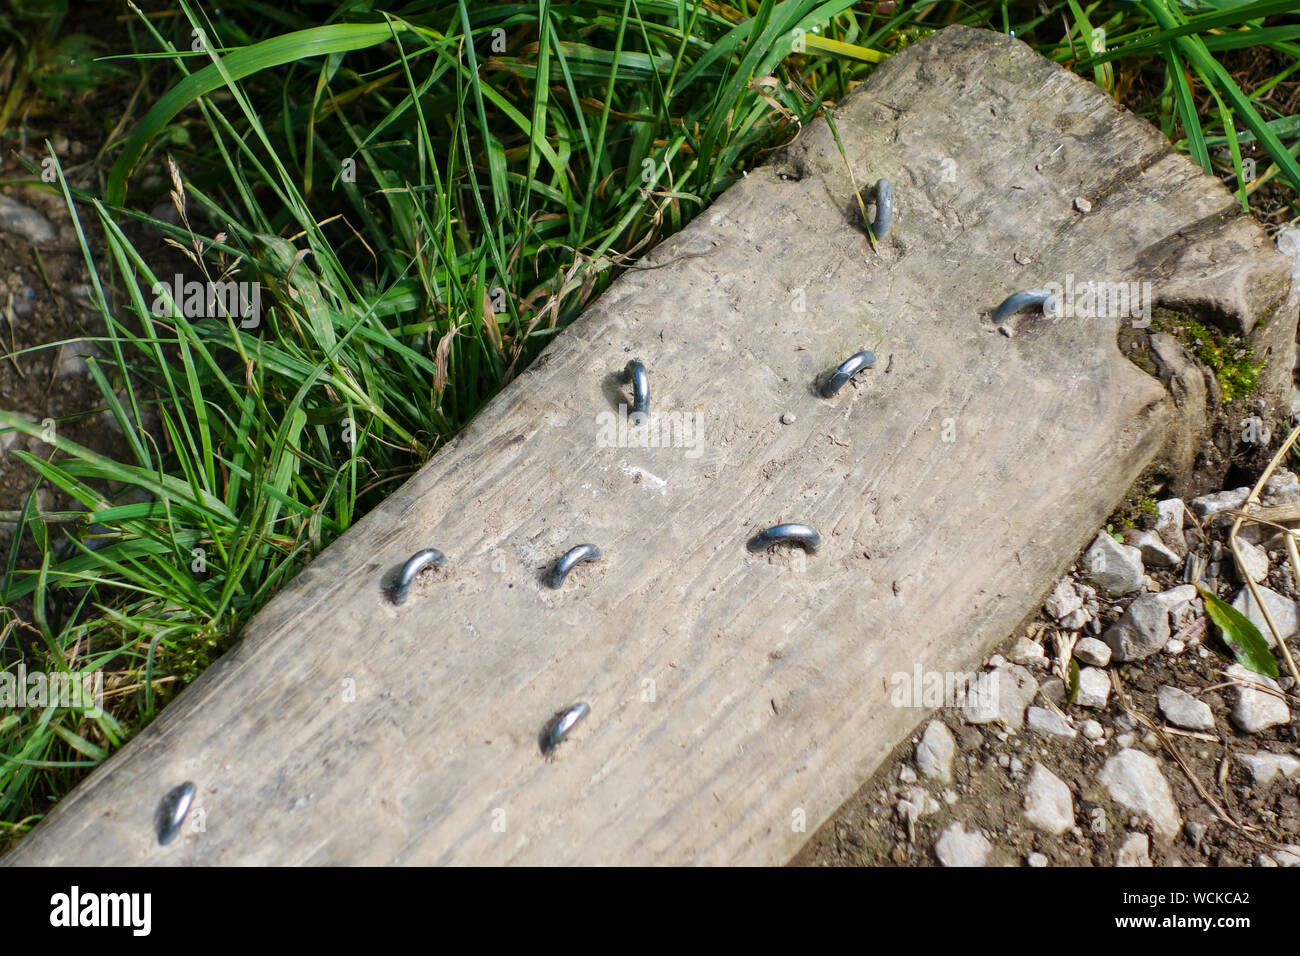 Staples nailed into a wooden board to aid grip on a stile, Staffordshire, England, UK Stock Photo